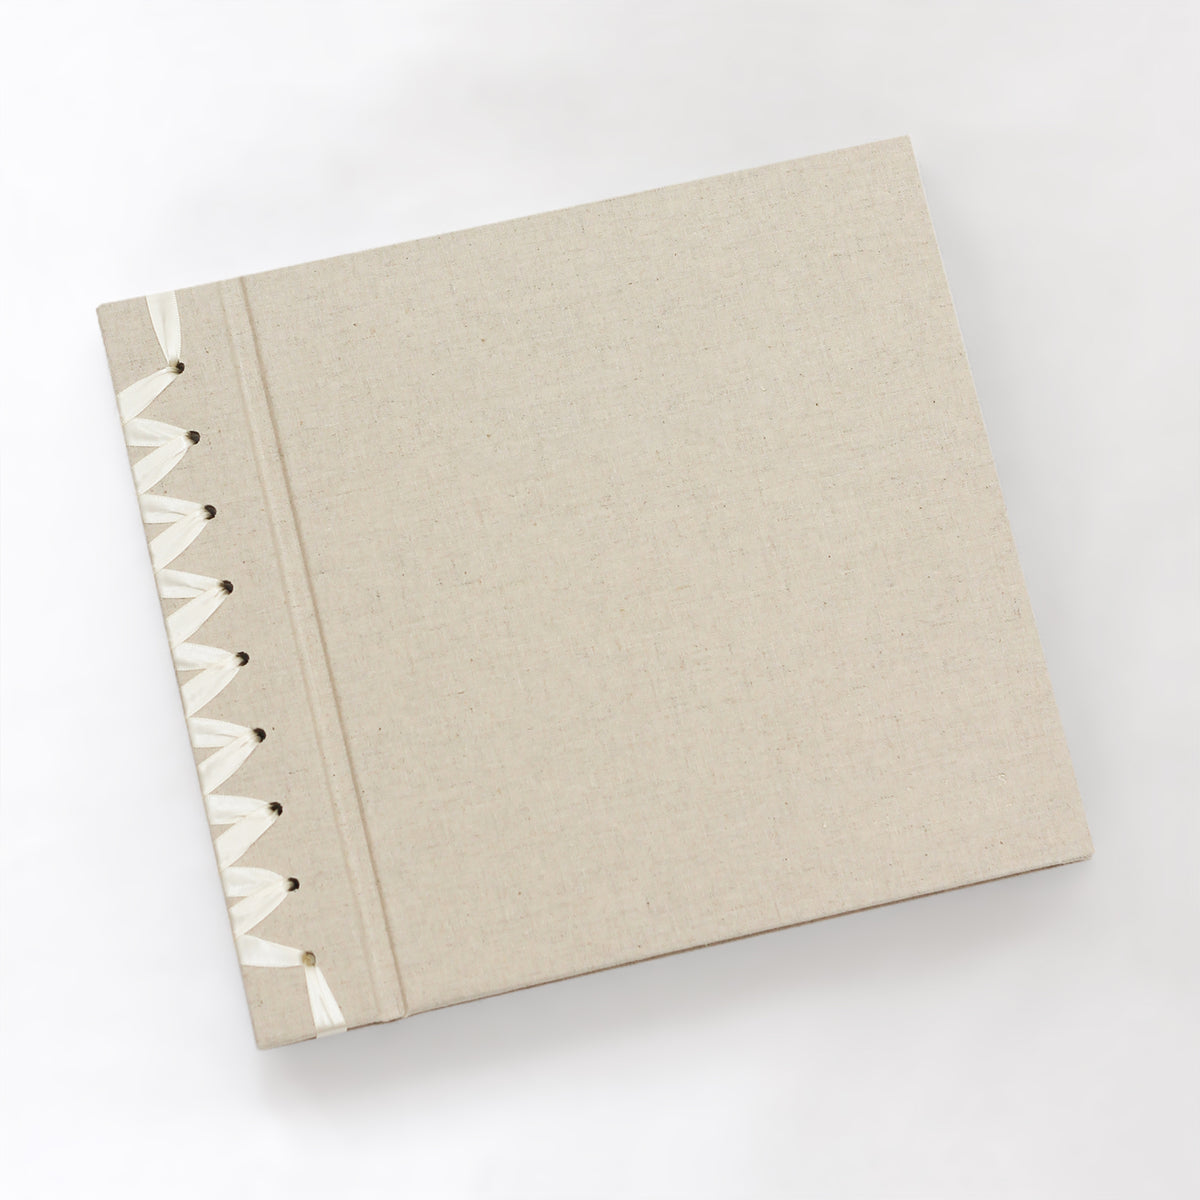 Baby&#39;s First Book | Cover: Natural Linen | Available Personalized